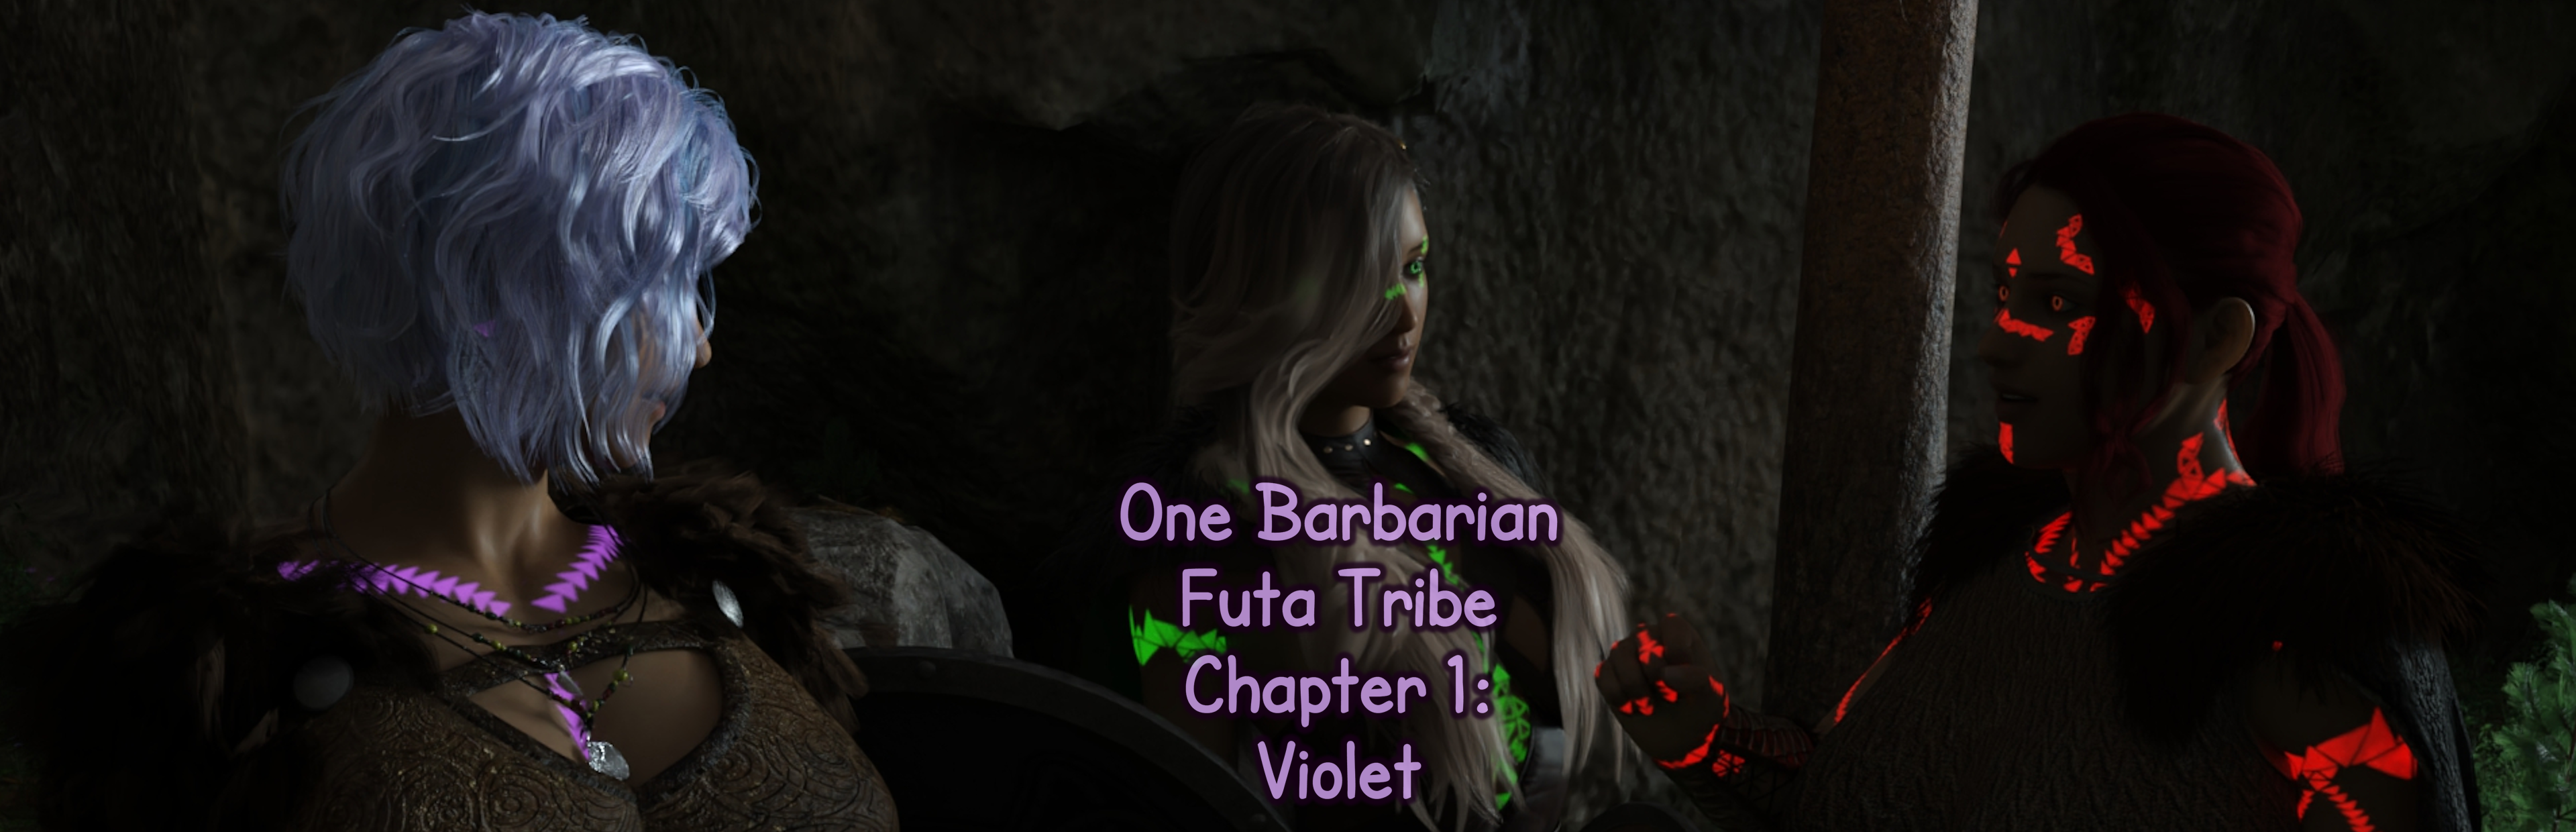 One Barbarian Futa Tribe Chapter 1: Violet poster